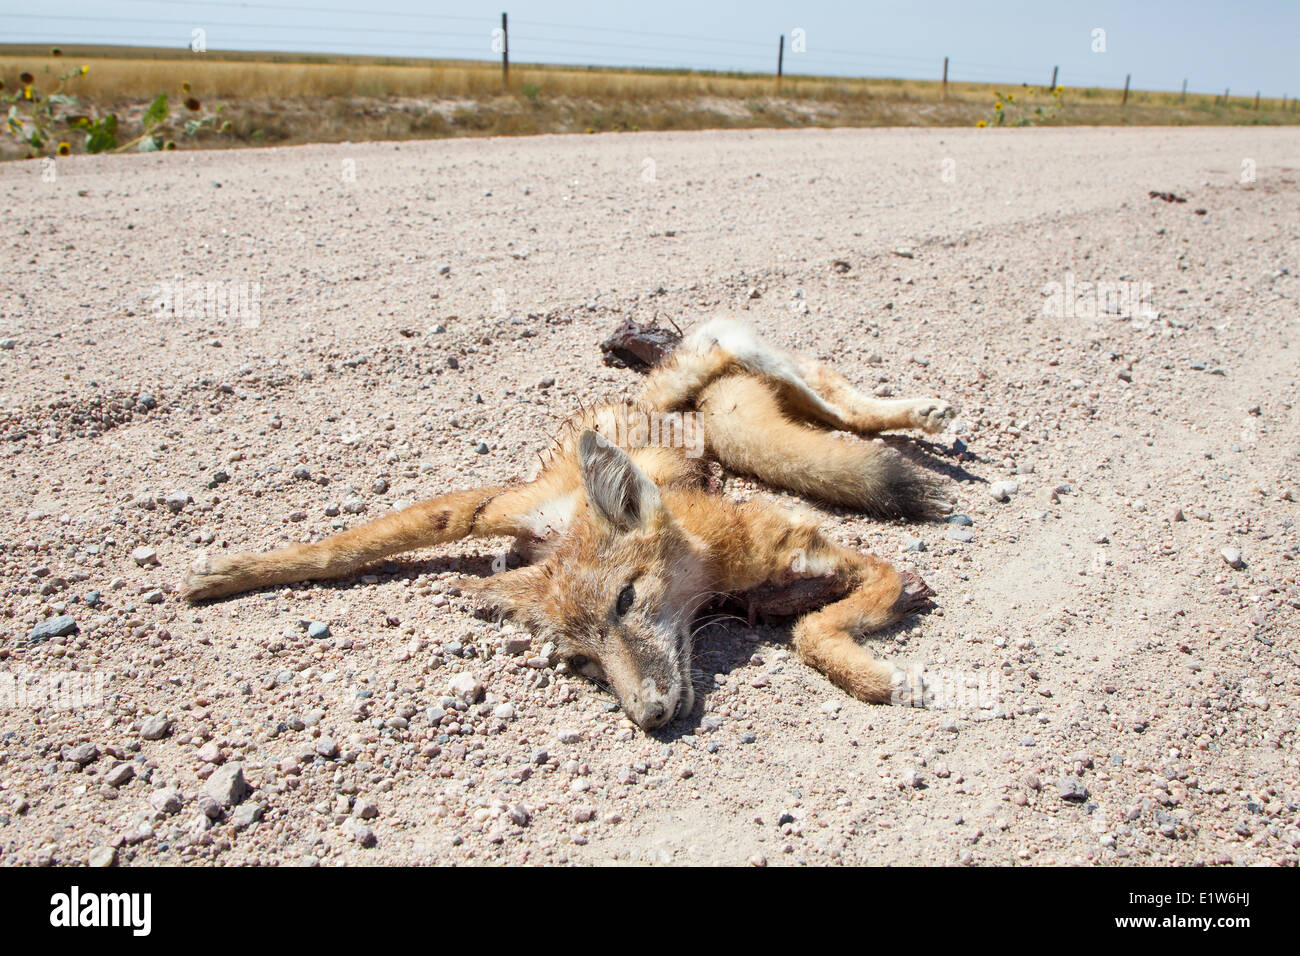 Road-killed swift fox kit (Vulpes velox) near a Colorado. Vehicles are a major source mortality for swift foxes. This species Stock Photo